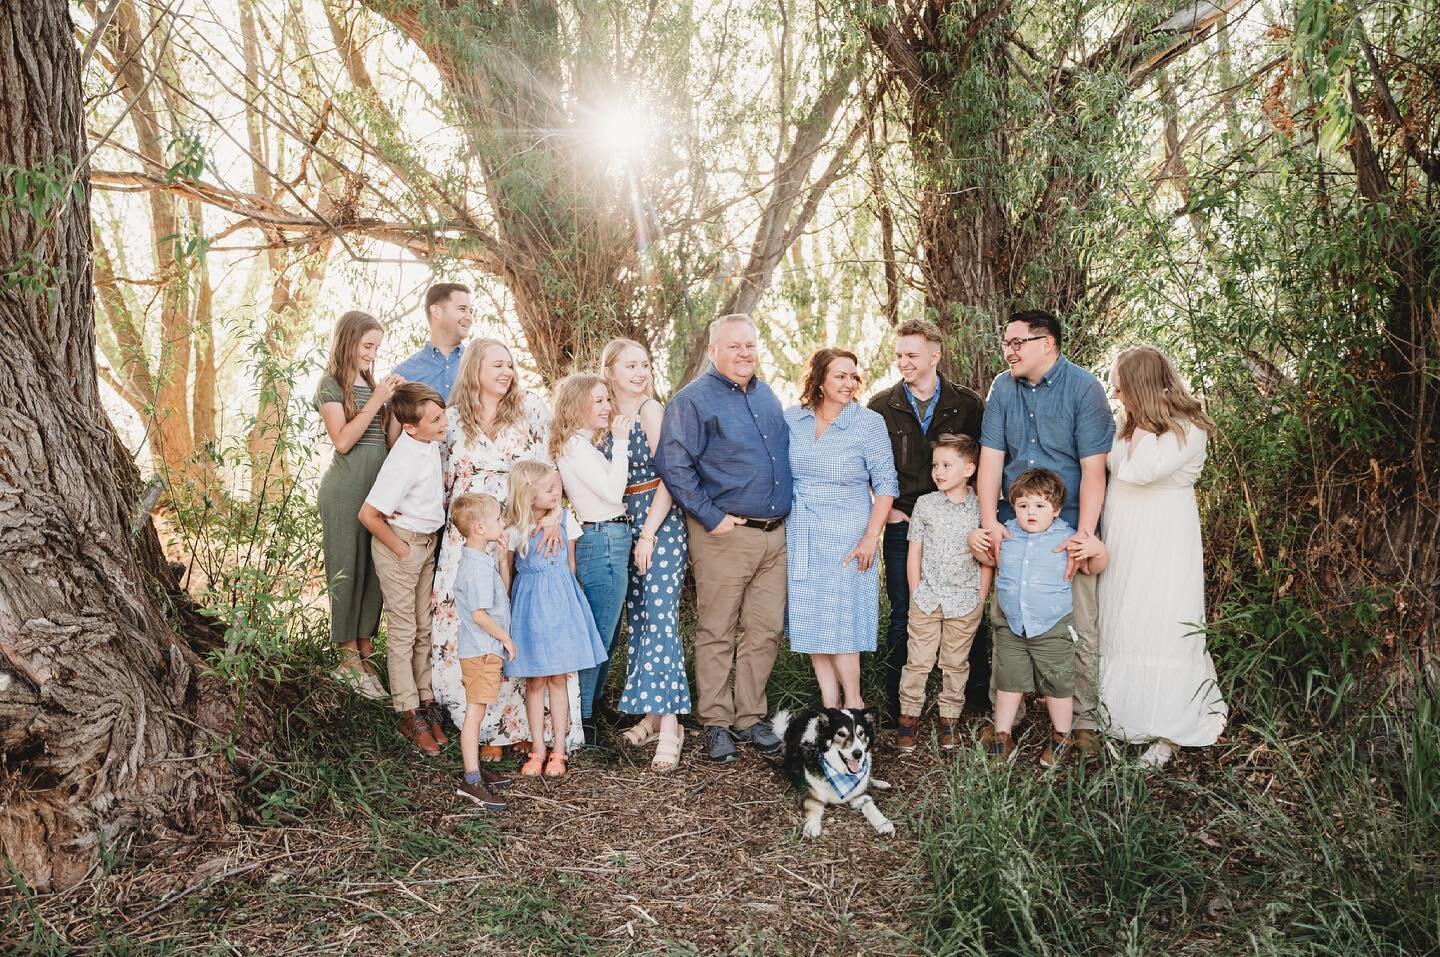 Who&rsquo;s going to a family reunion this summer?? I know I am! If you&rsquo;re going to one, where are doing yours??

You might be considering getting family pictures done while everyone is together! That&rsquo;s a great idea!

Here&rsquo;s a tip f